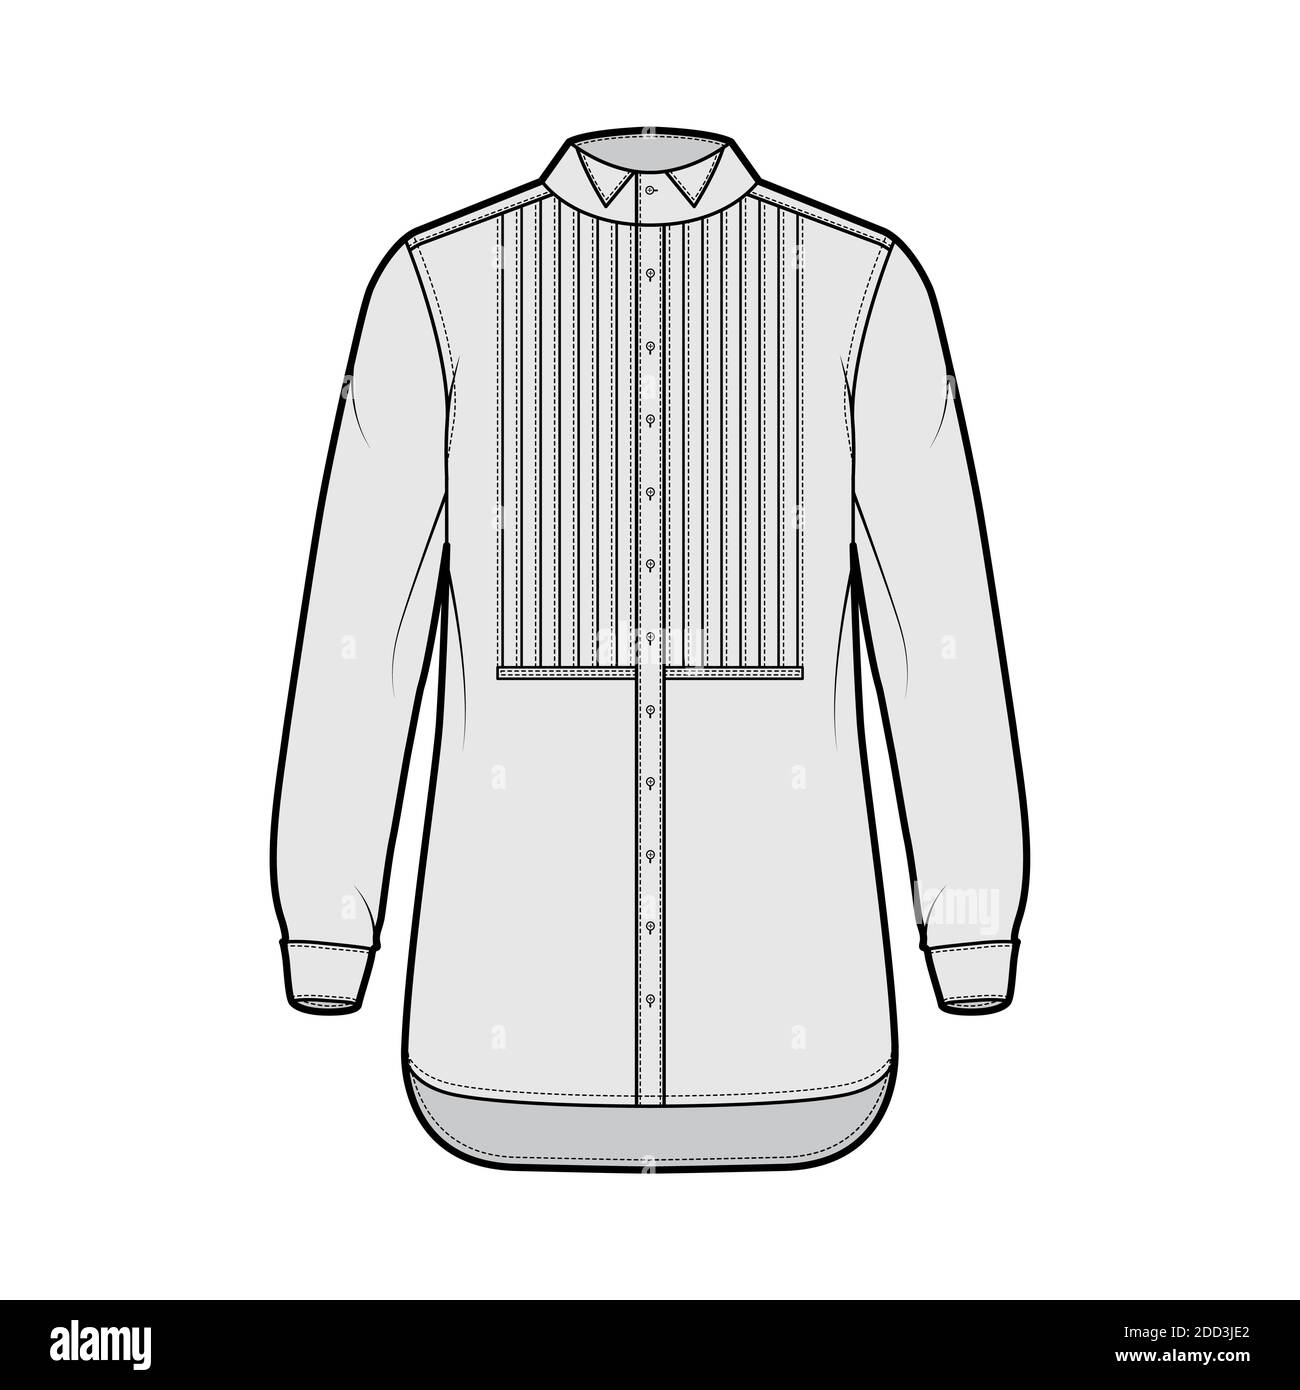 Shirt tuxedo dress technical fashion illustration with pleated pintucked bib, long sleeves with french cuff, wing collar, relax fit. Flat template front grey color. Women men unisex top CAD mockup Stock Vector